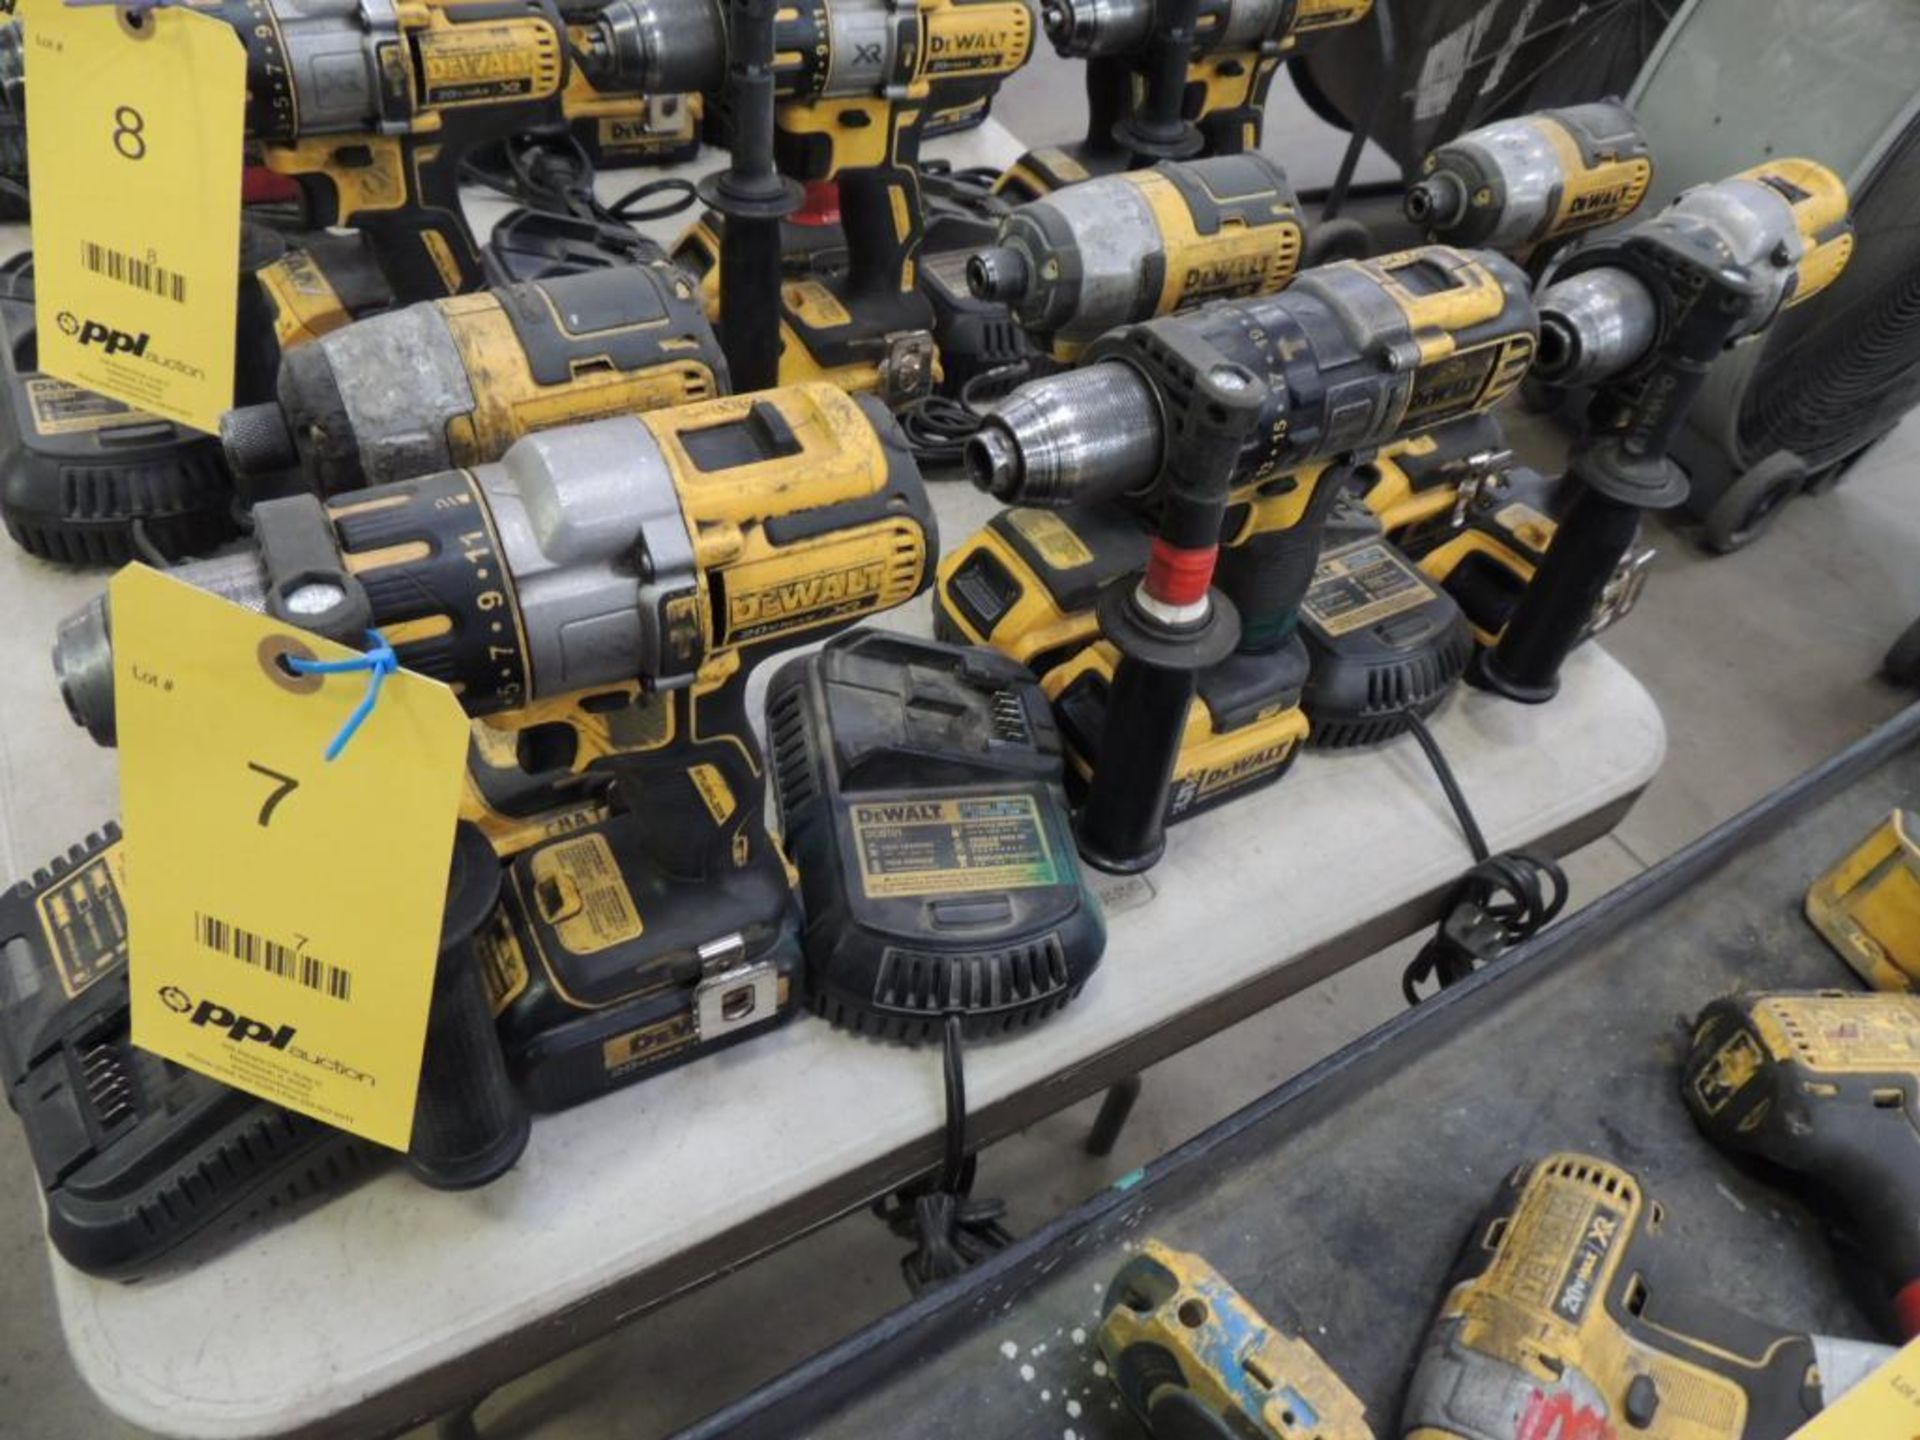 LOT: Dewalt 1/4 in. Impact, 1/2 in. Drill with (2) Batteries, Charger, 20 Volt